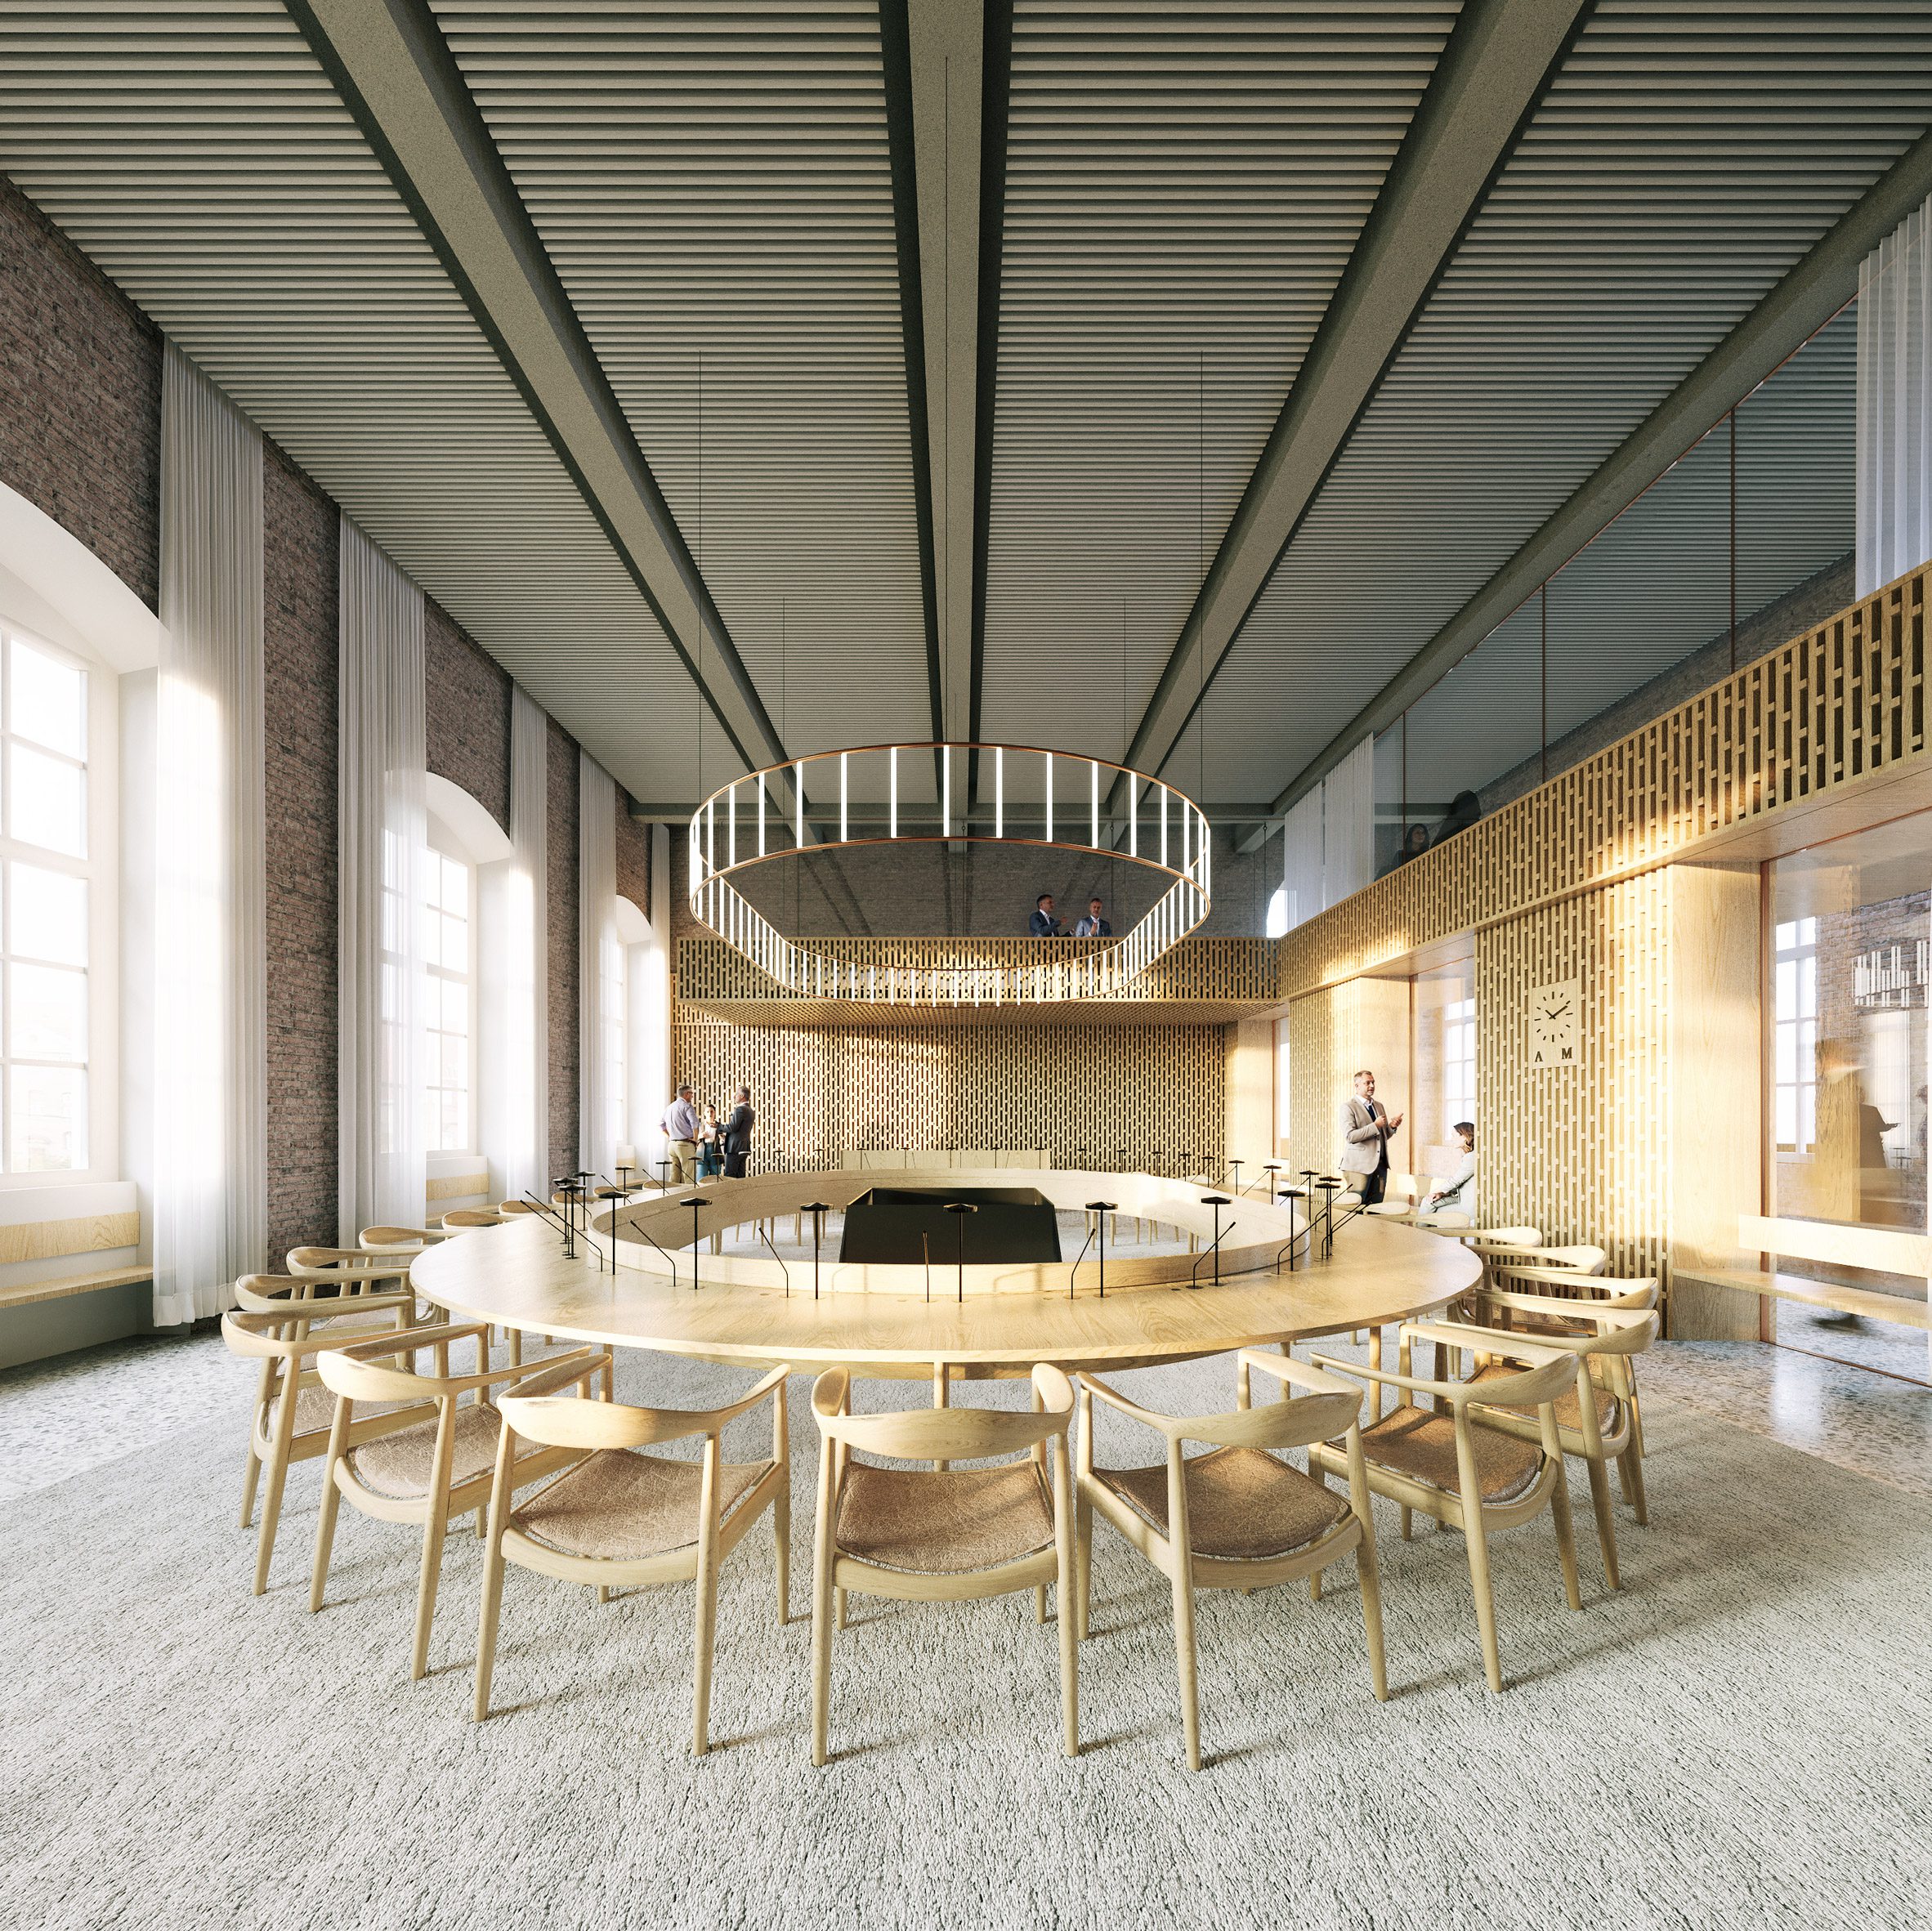 Government building interior by Cobe, Arcgency and Drachmann Arkitekter